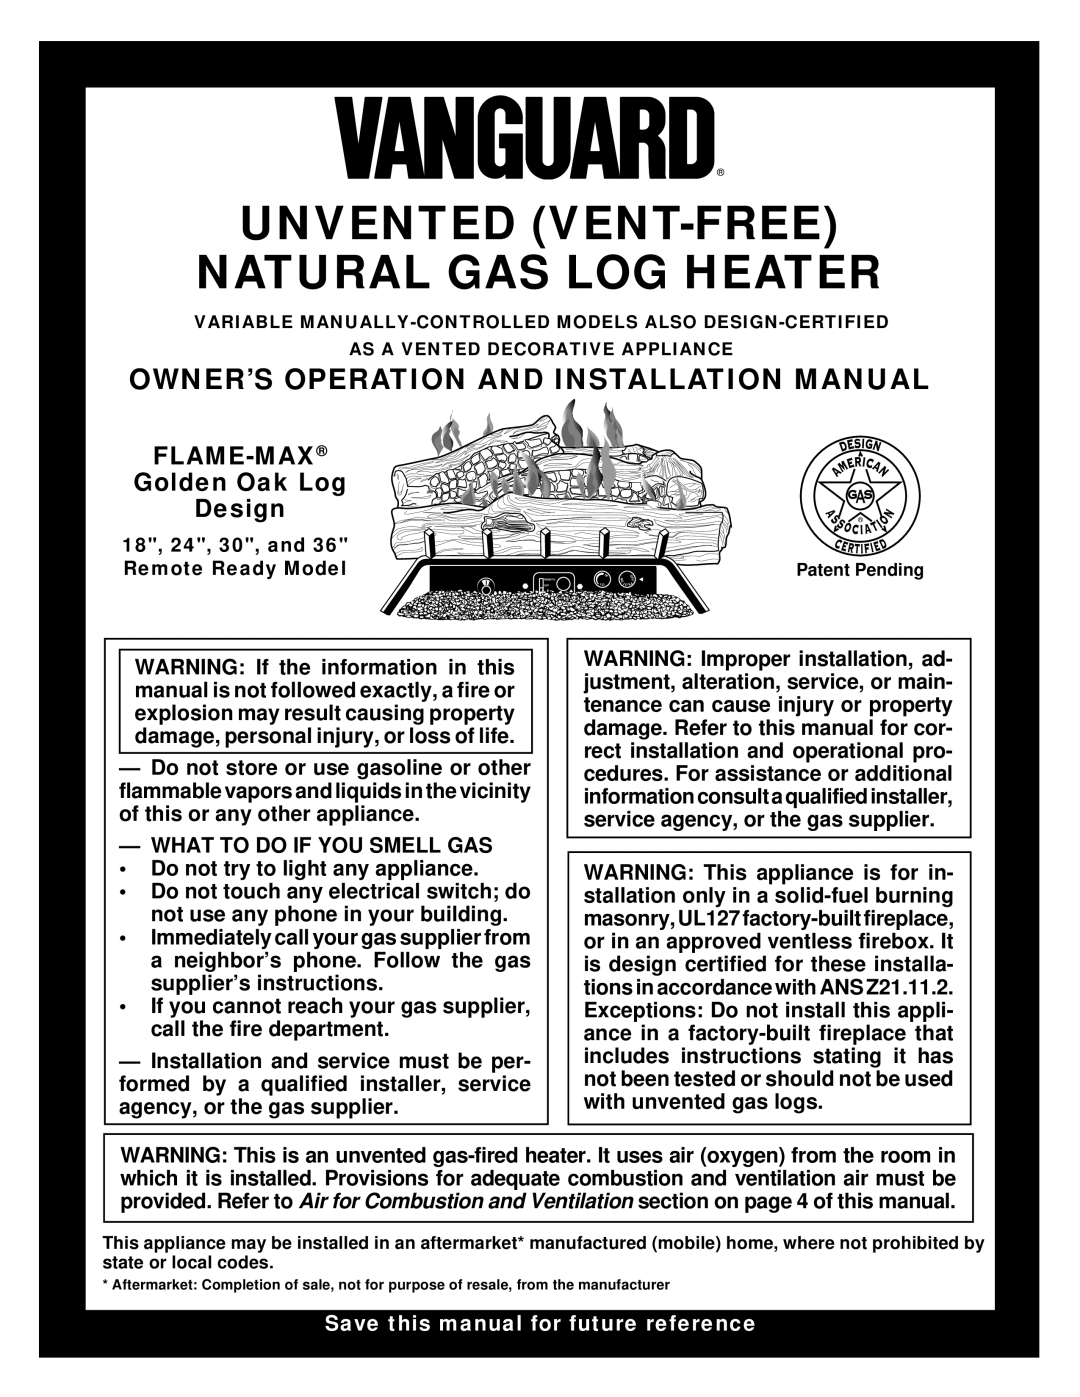 Vanguard Heating UNVENTED (VENT-FREE) NATURAL GAS LOG HEATER installation manual Owner’S Operation And Installation Manual 